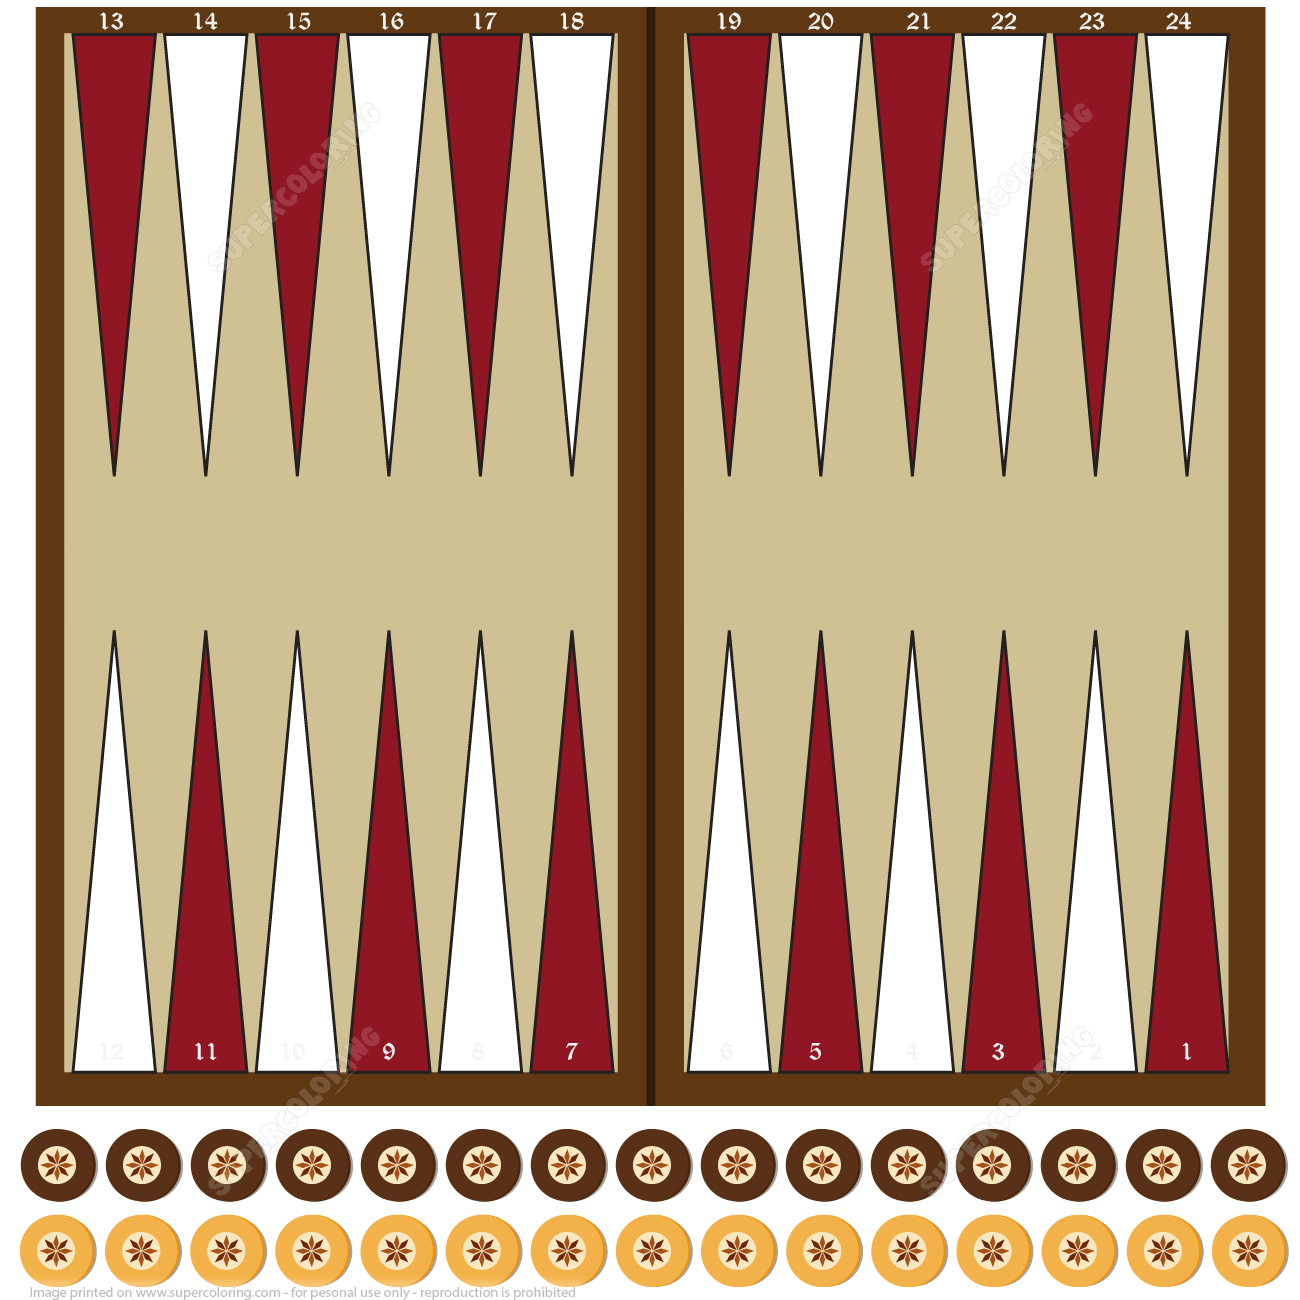 Printable Paper Backgammon Board With Chips Free Printable Papercraft Templates